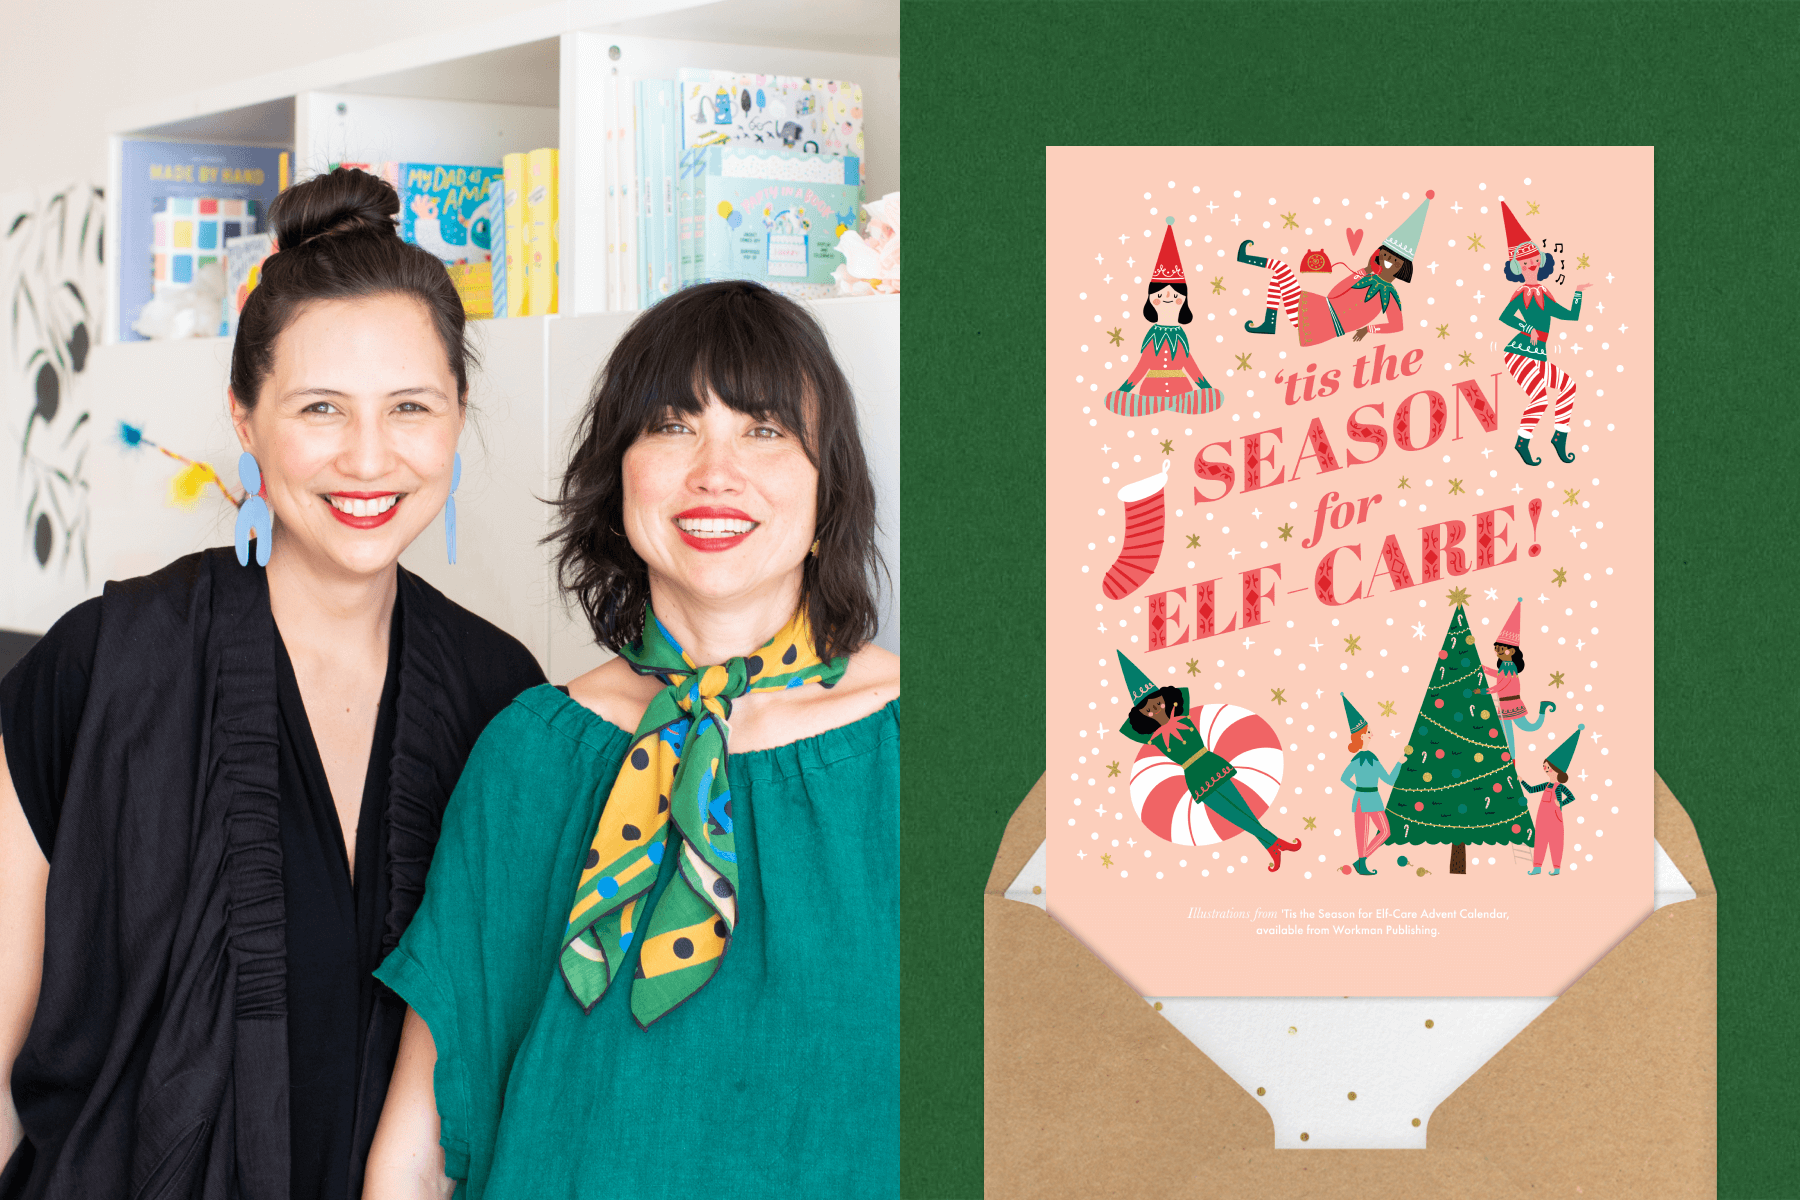 Left: A portrait of Sabrina and Eunice Moyle in their studio; right: A pink holiday card that reads “Tis the season for elf care!” and features elf illustrations.